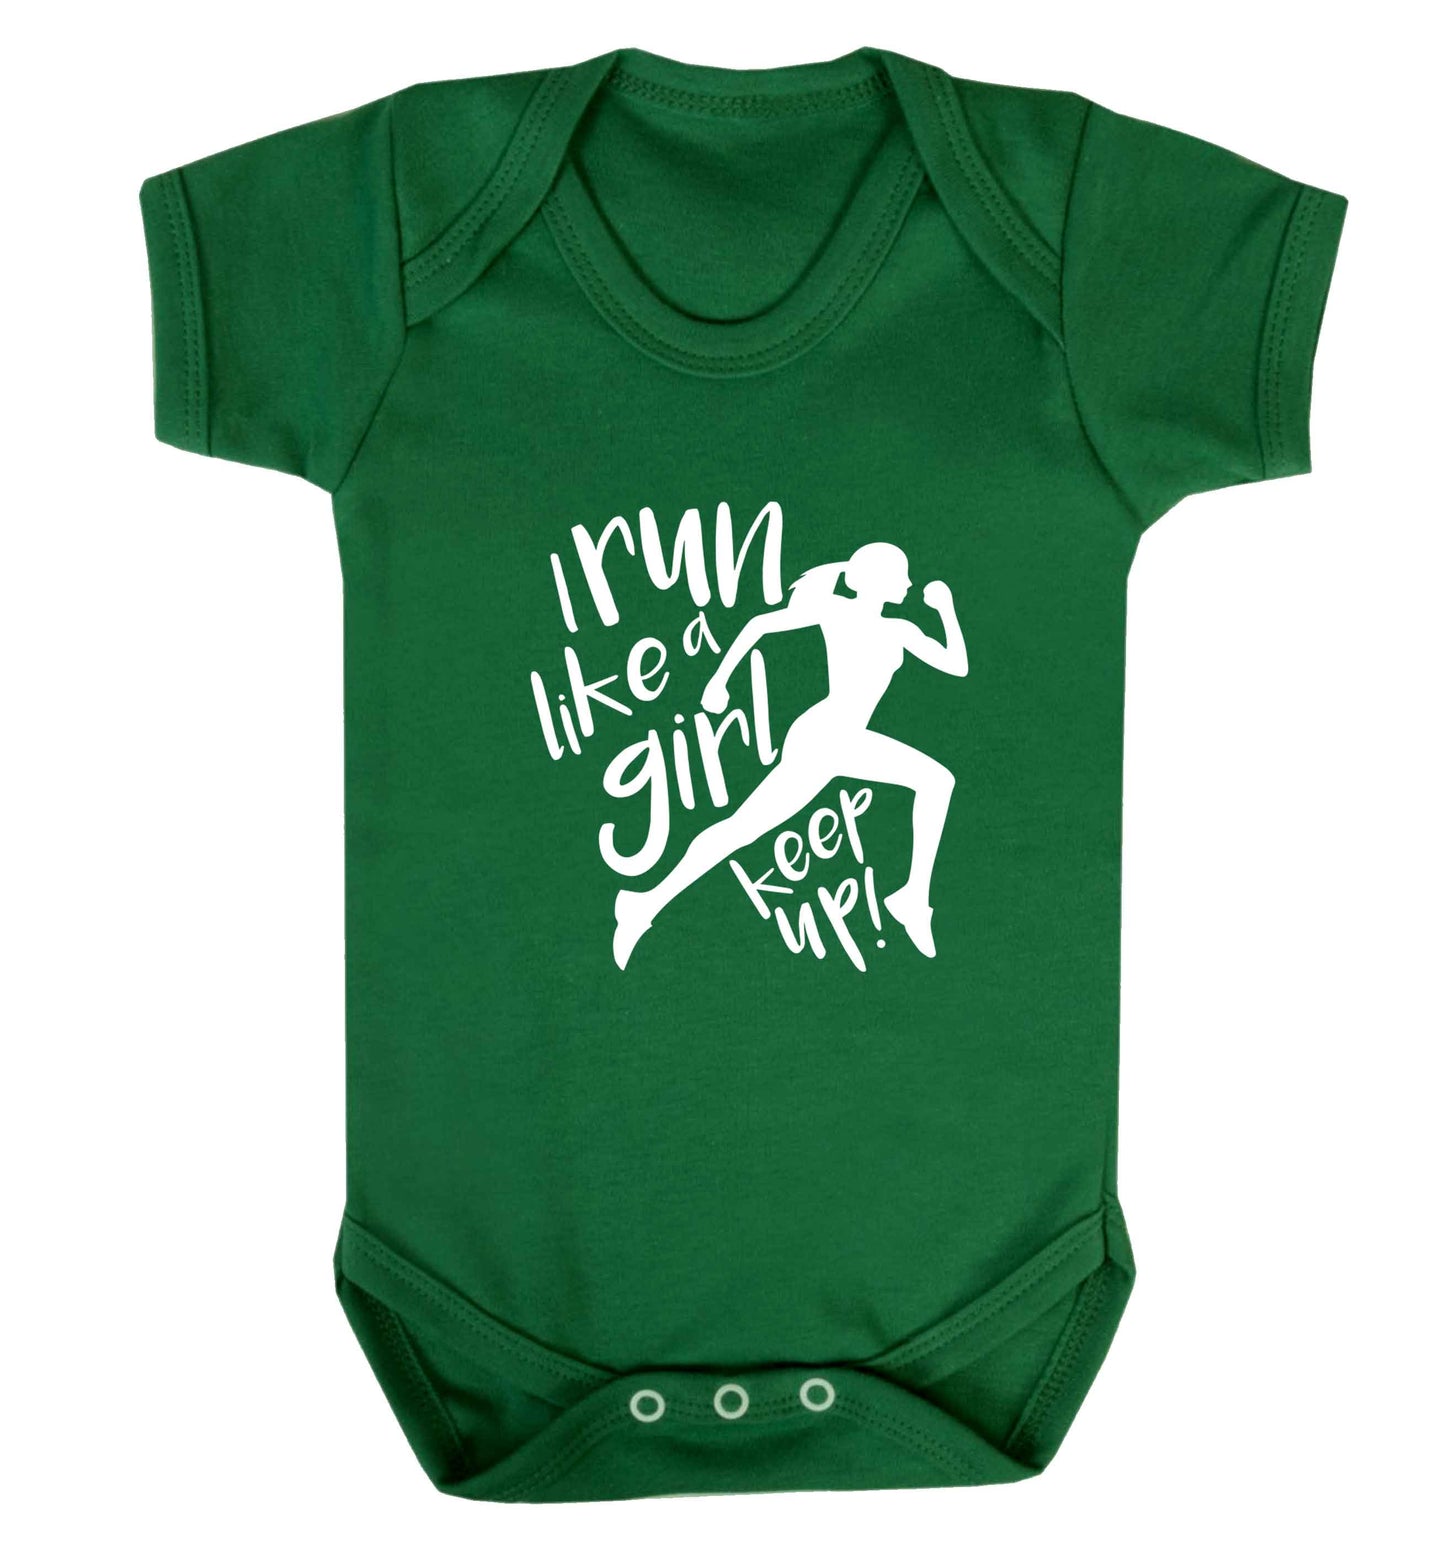 I run like a girl, keep up! baby vest green 18-24 months